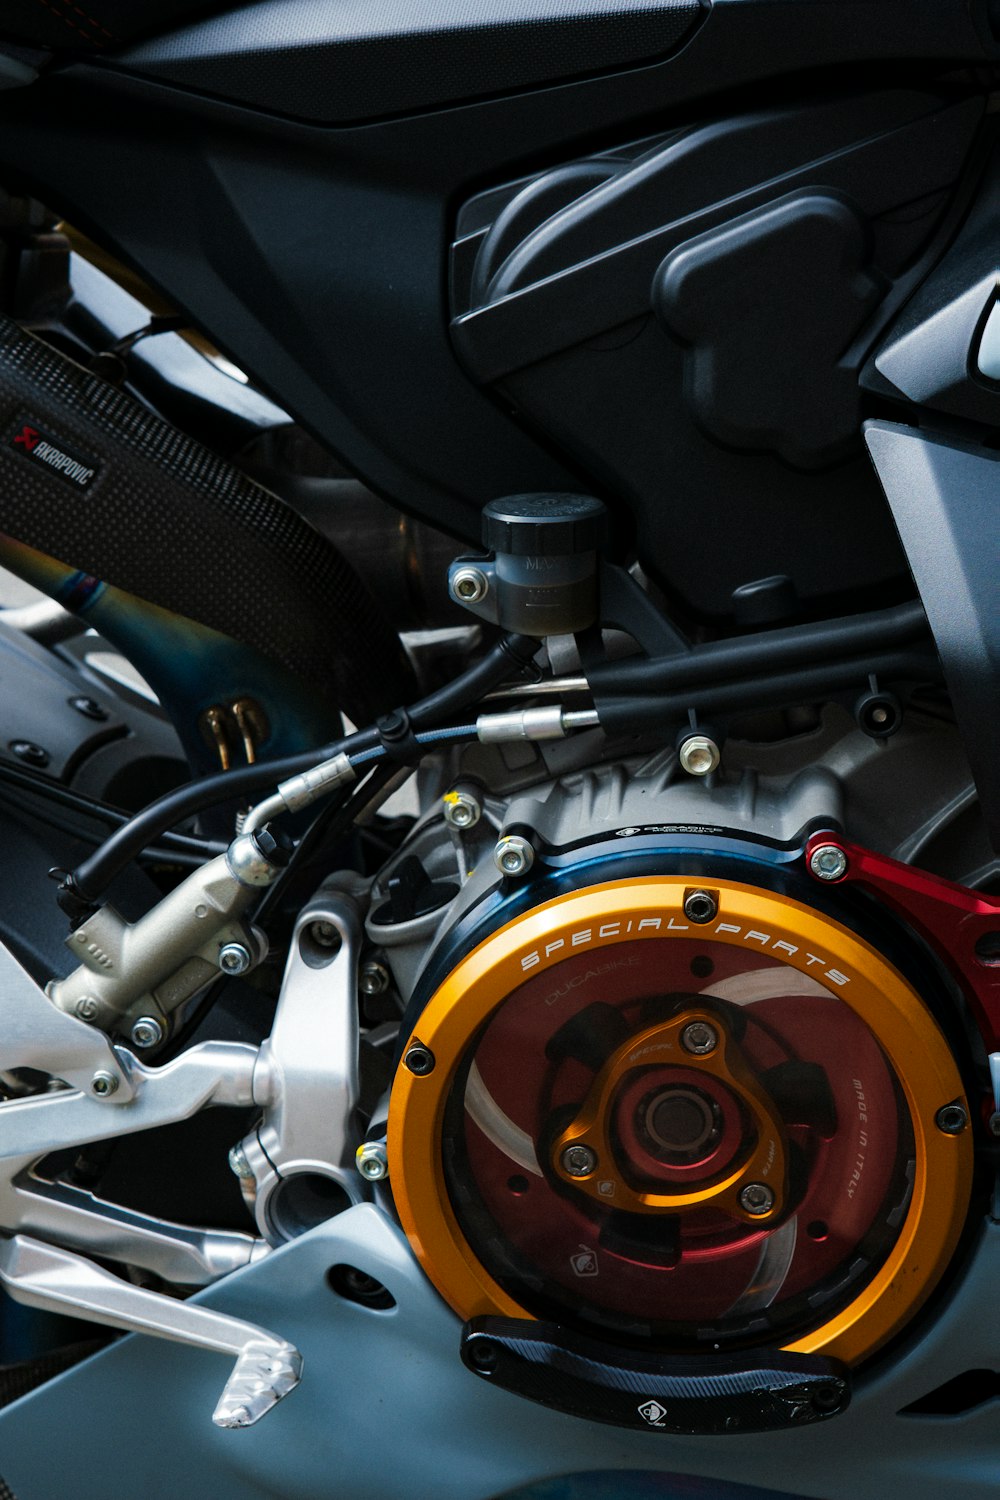 a close up of a motorcycle's engine and gear